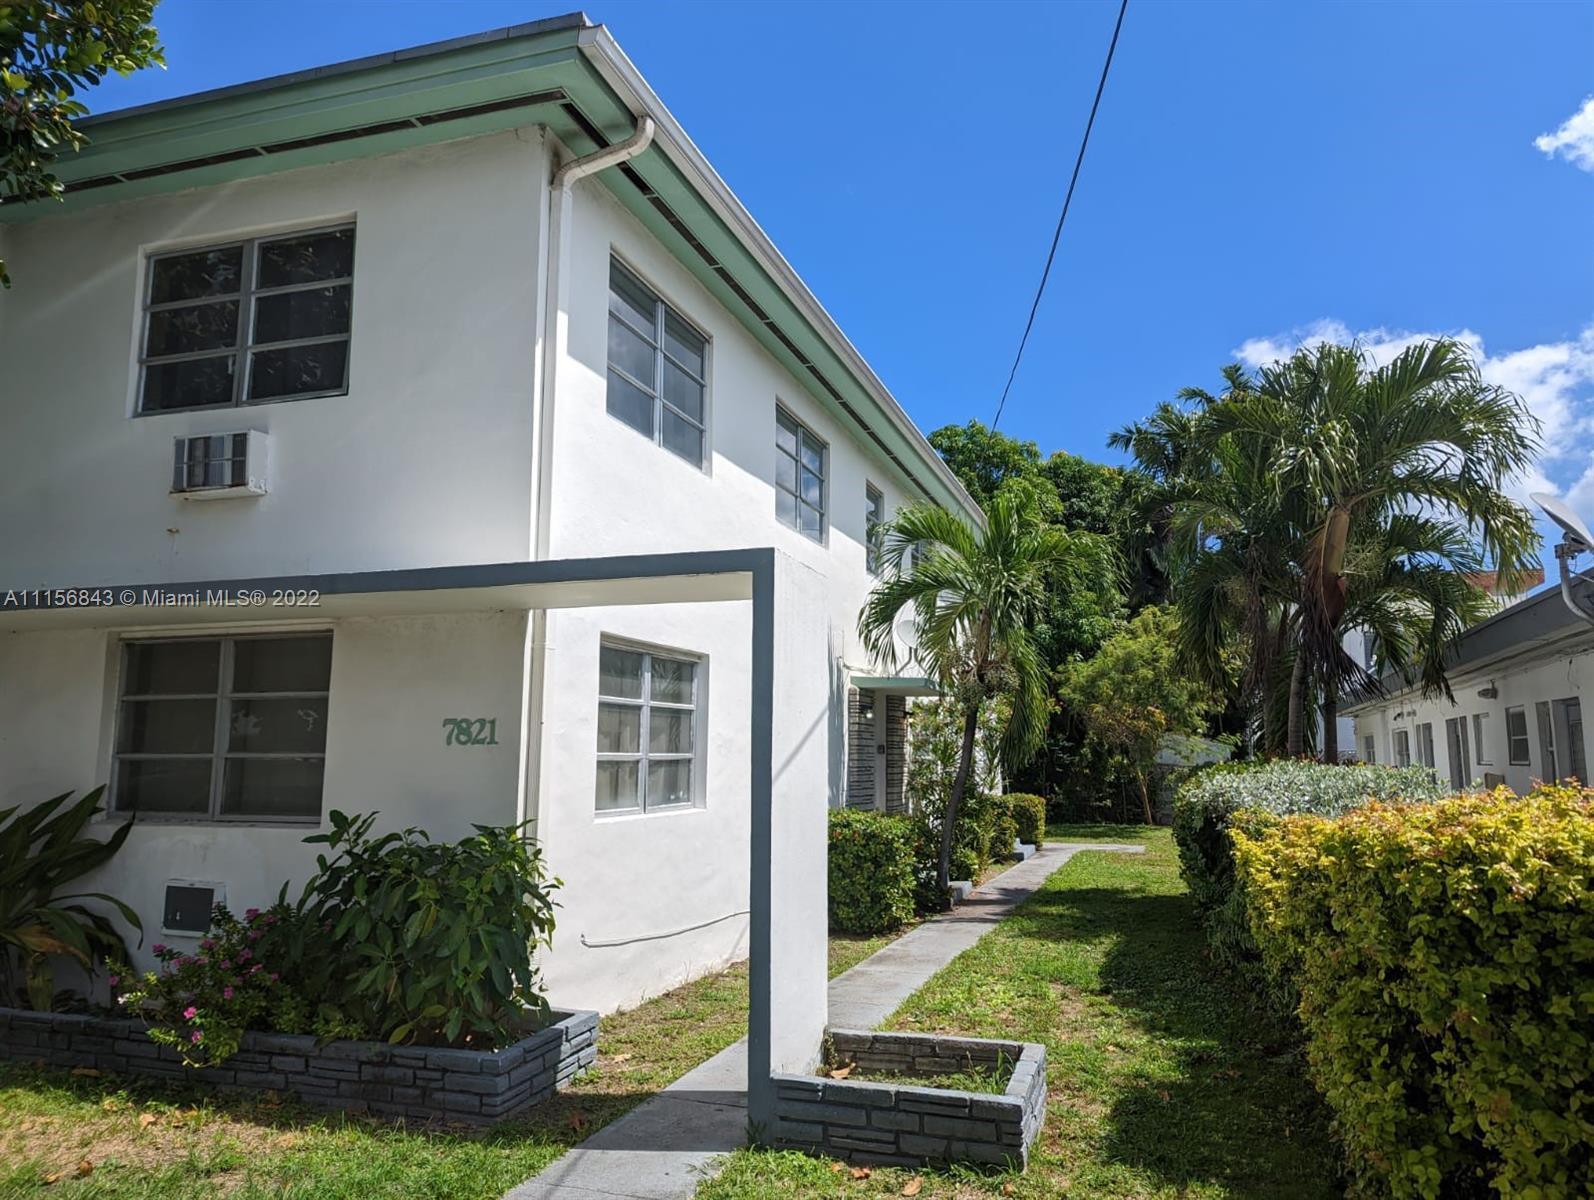 7821  Byron Ave  For Sale A11156843, FL